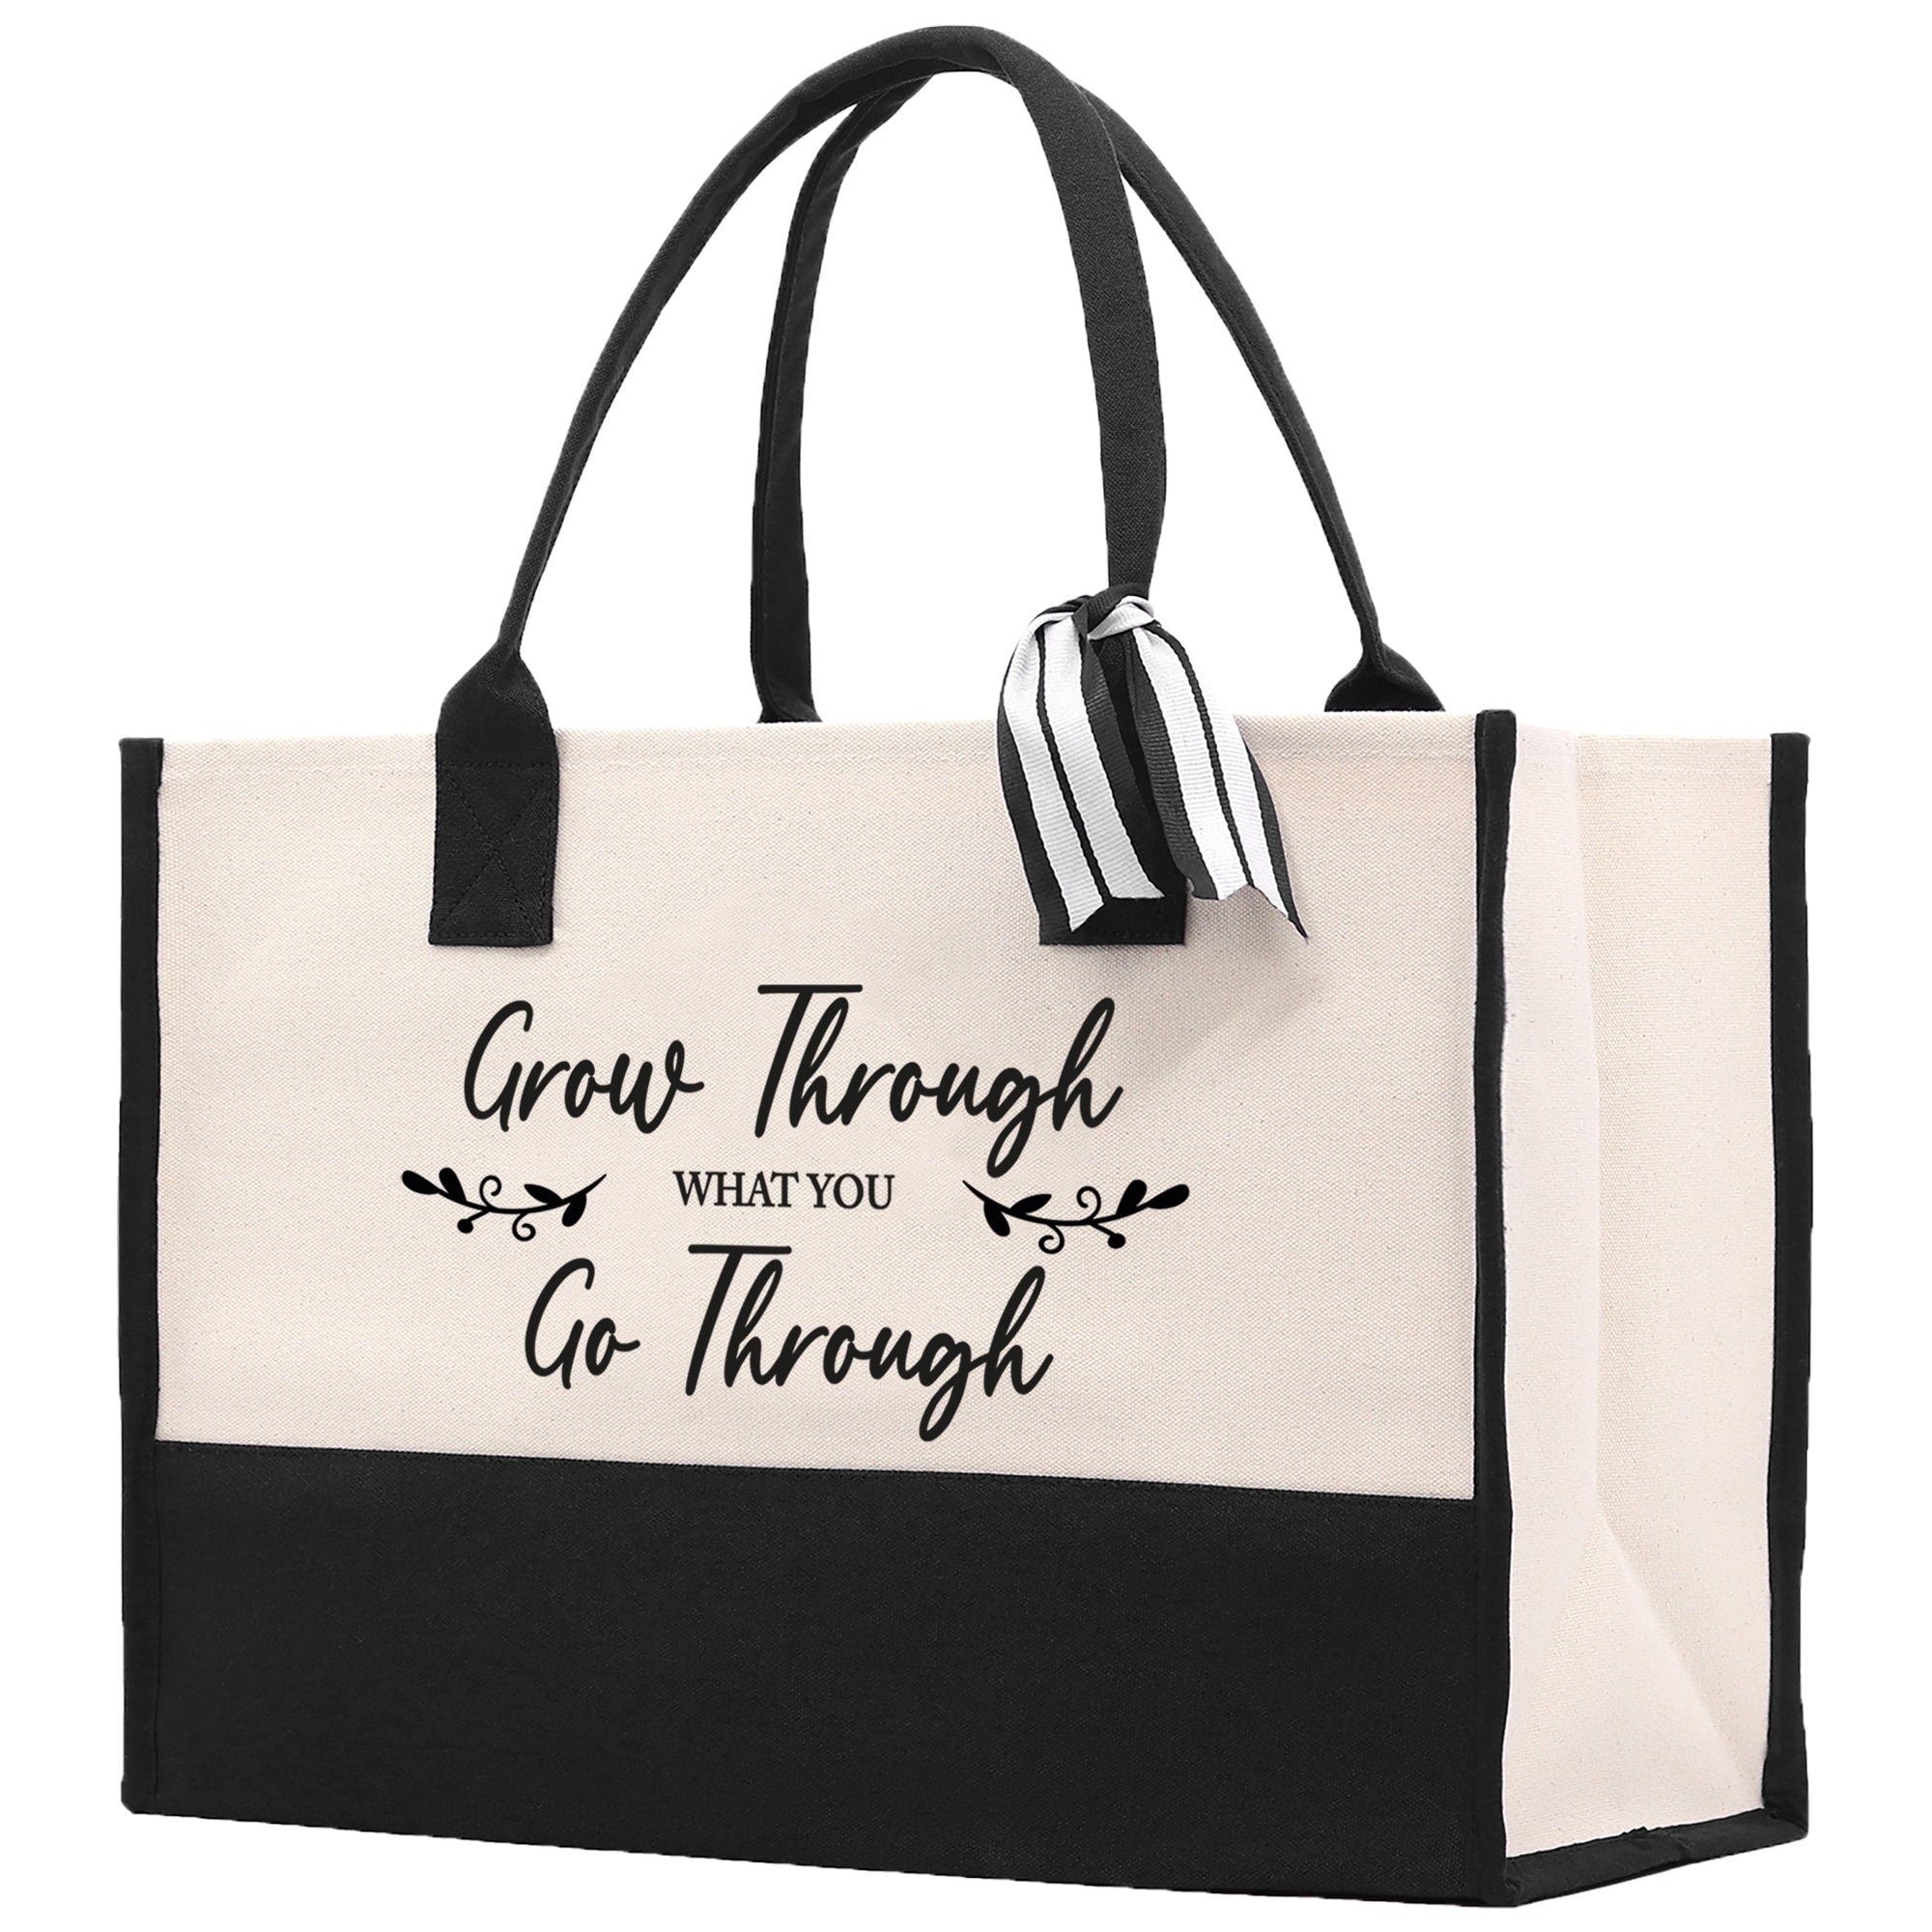 Grow Through What You Go Through Canvas Tote Bag Birthday Gift for Her Weekender Tote Bag Beach Tote Bag Large Beach Tote Bag Beach Tote Bag